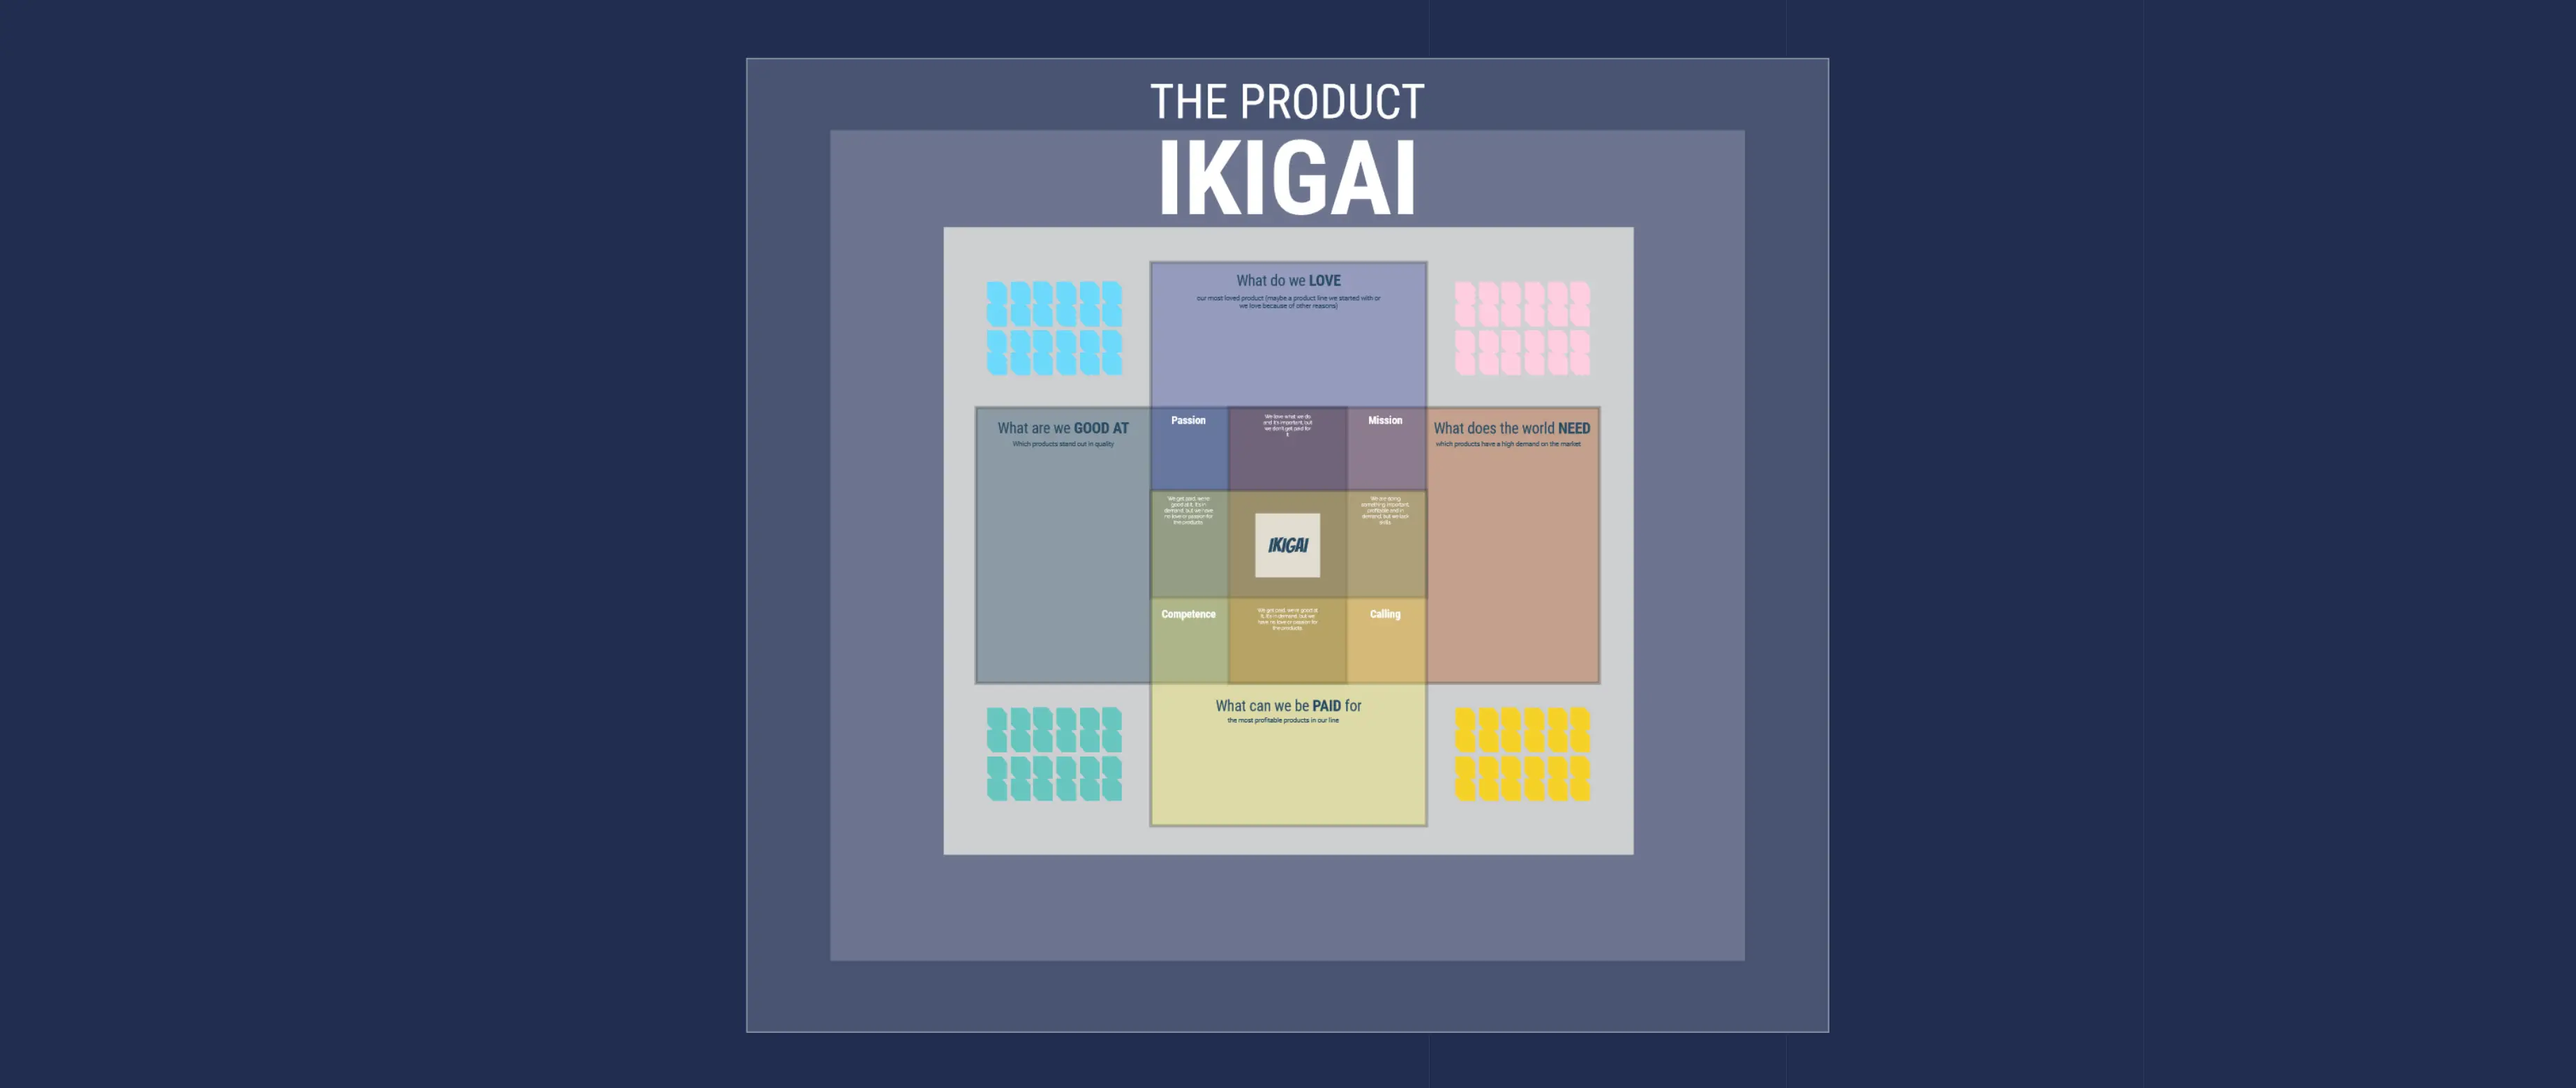 Template cover of Product IKIGAI - Business Analysis